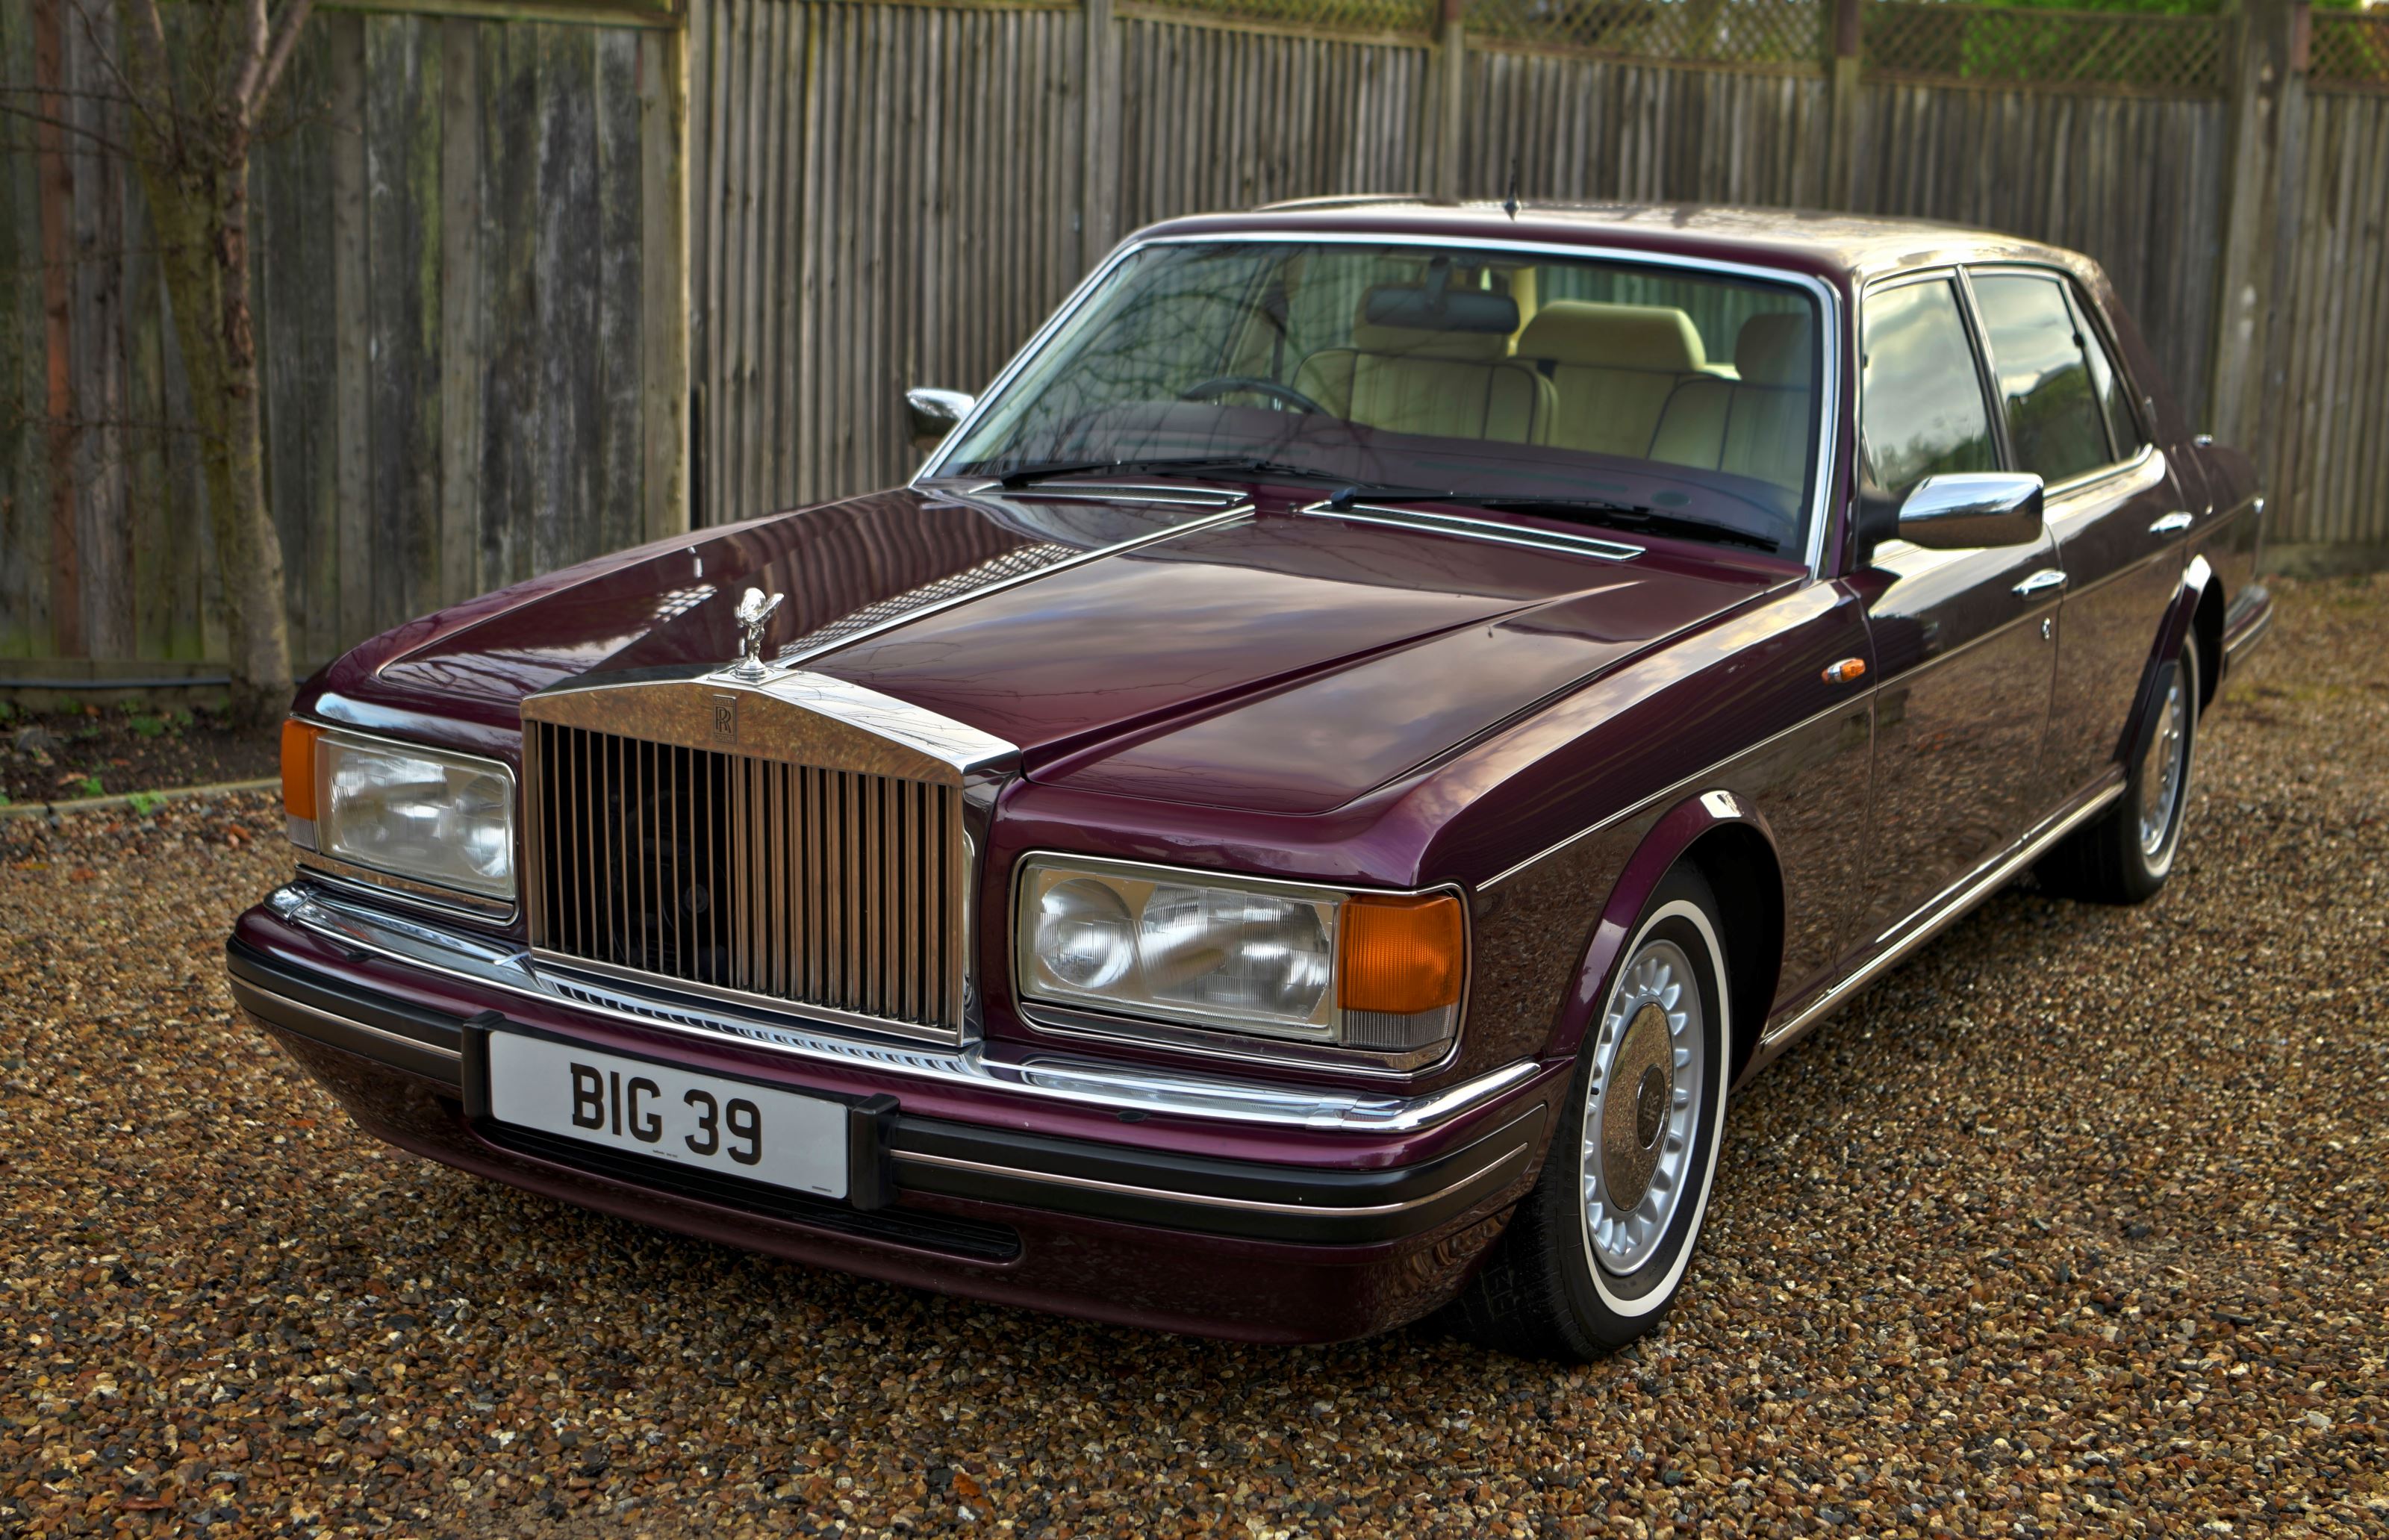 Classic Rolls Royce Silver Spur Cars for Sale